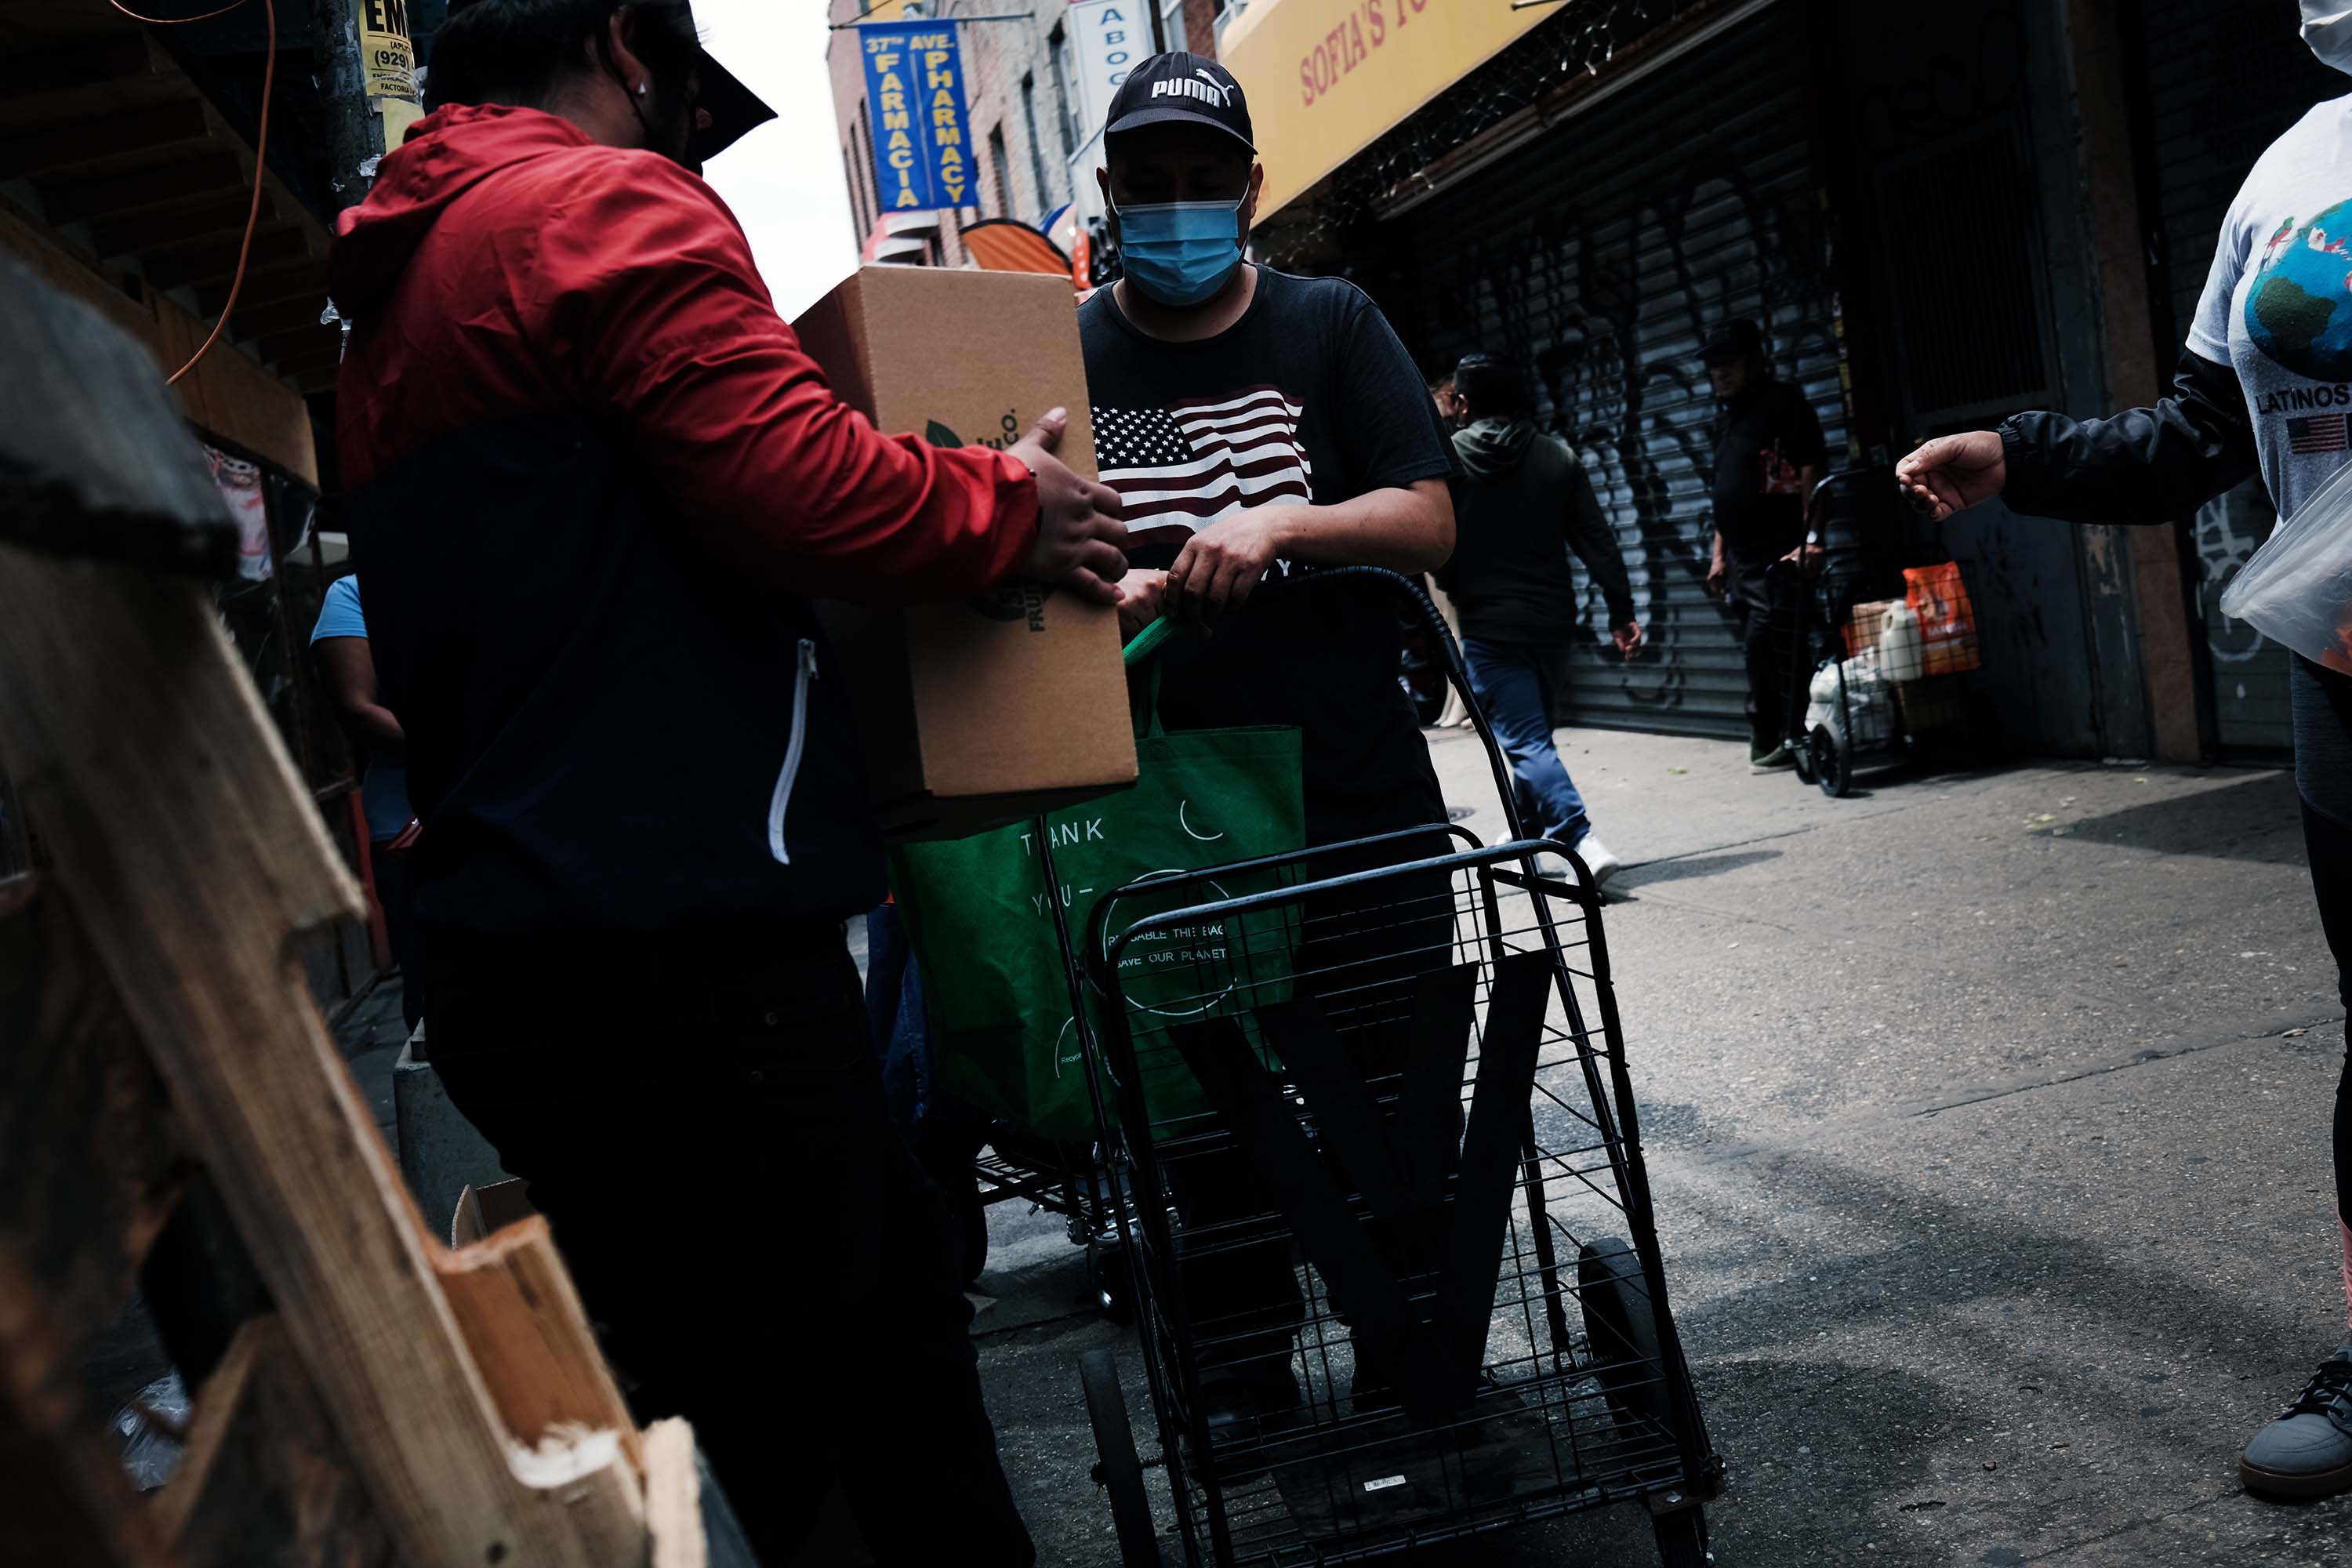 People receive food from a local charity in the Queens borough of New York City on June 4.